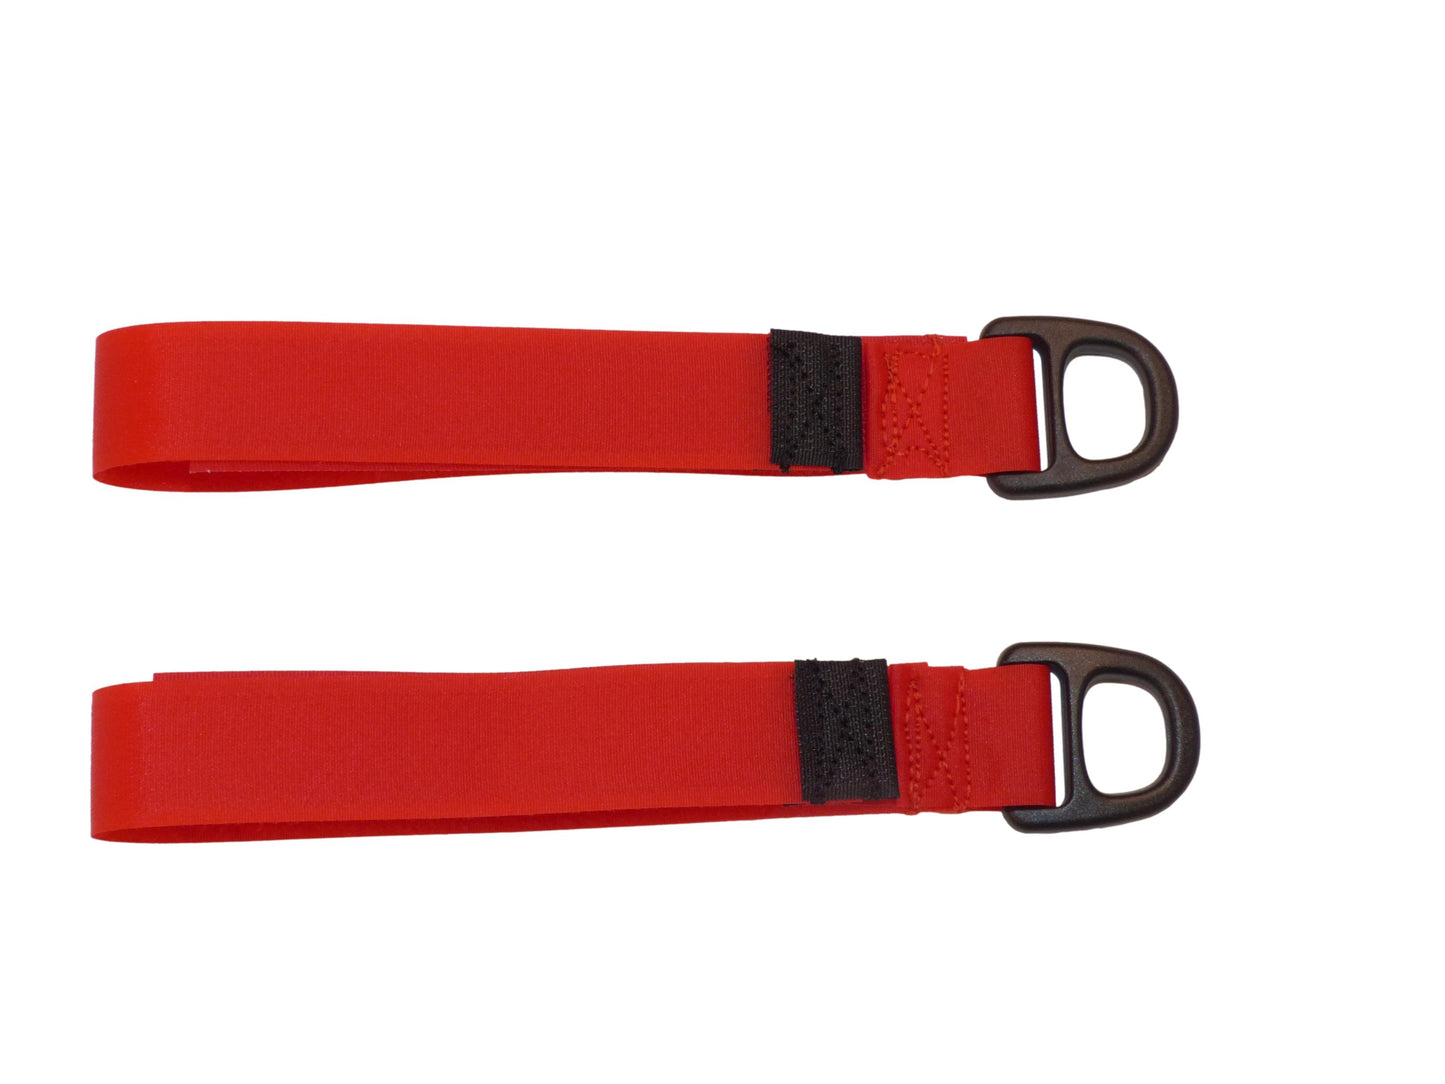 Benristraps 25mm Hook & Loop Tidy & Hang Strap with Plastic Ring (Pack of 2)  in red